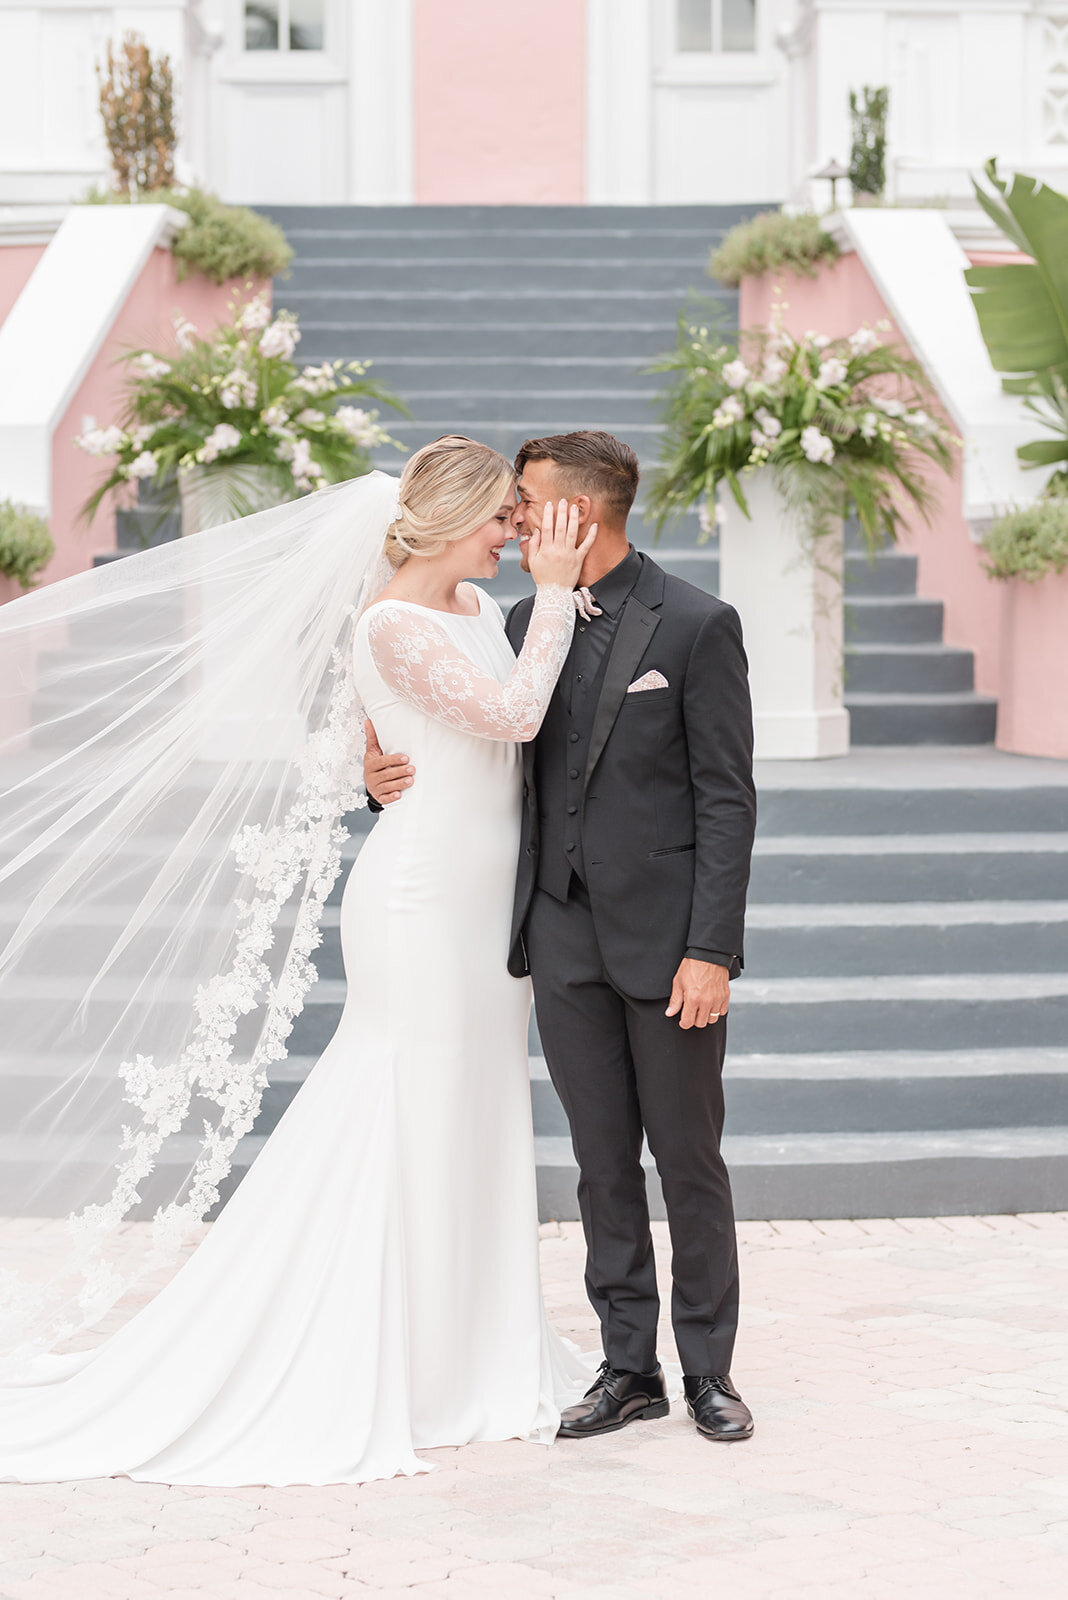 A grand and elegant pink and gold wedding at the Don Cesar planned by wedding Planner Riley G at Elegant Affairs by Design.jpg